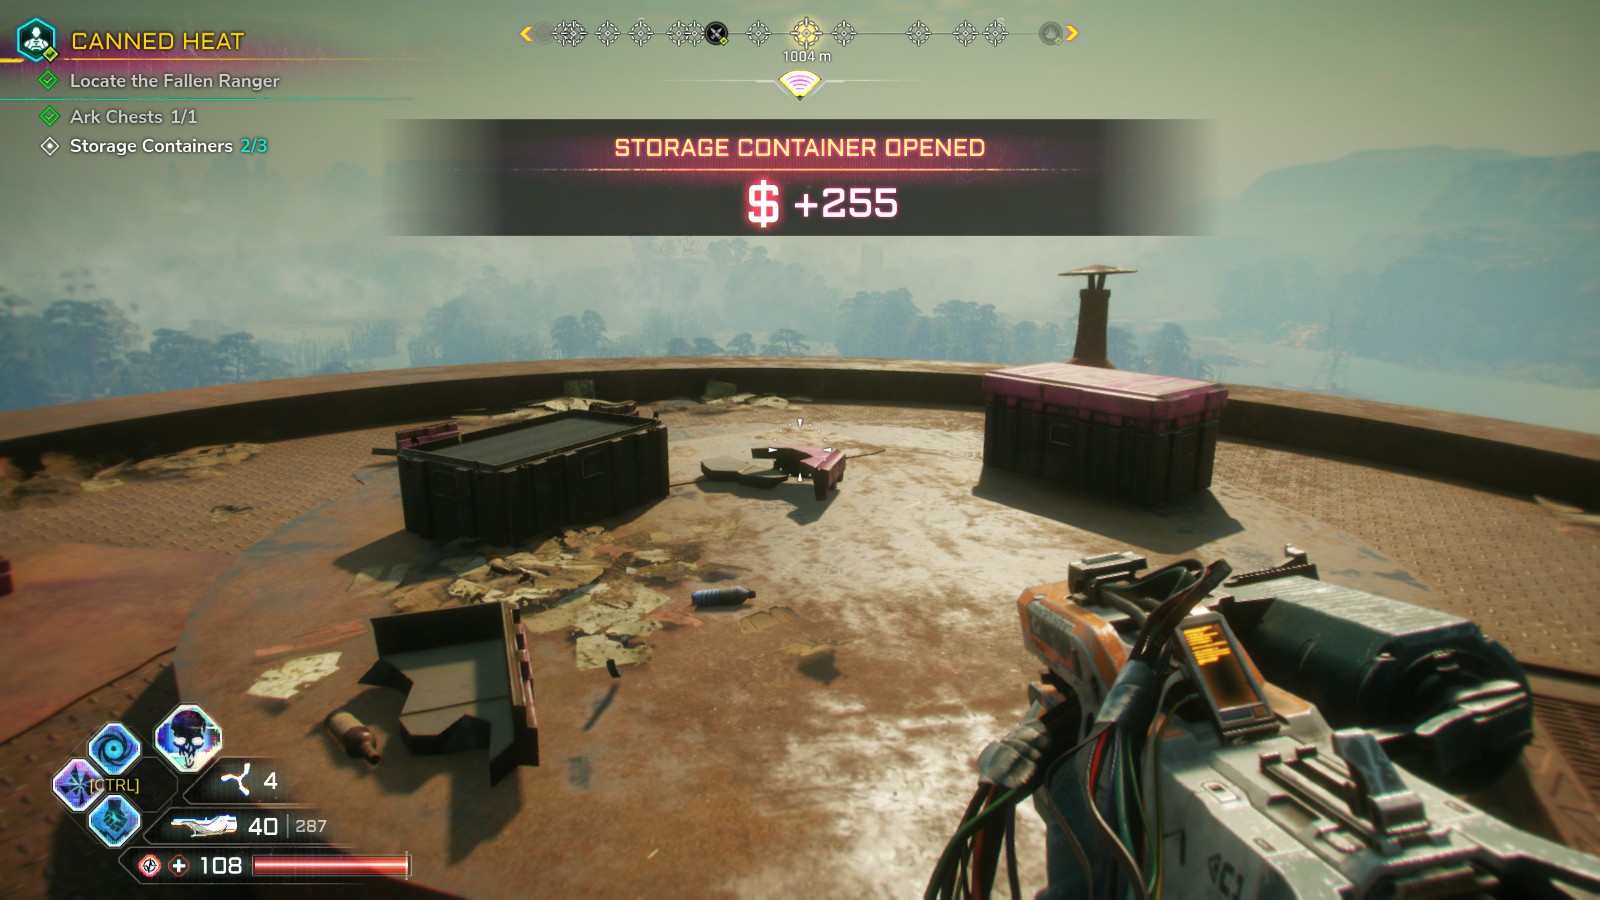 Rage 2 Tracking find ark chests storage containers 05